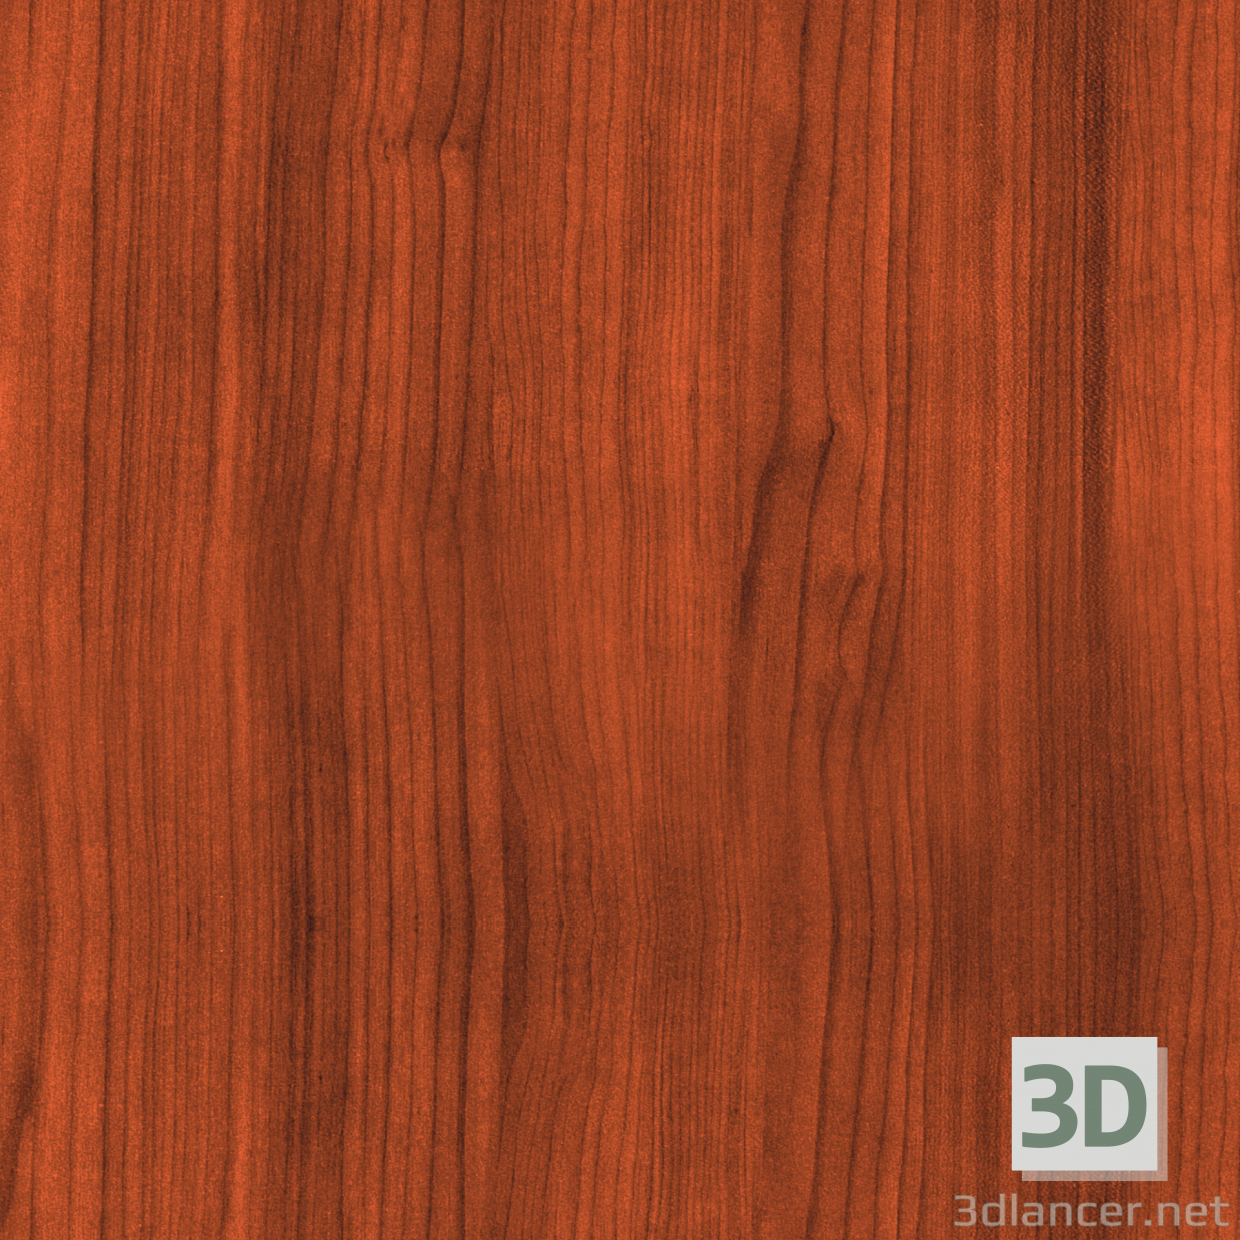 Texture WOOD free download - image